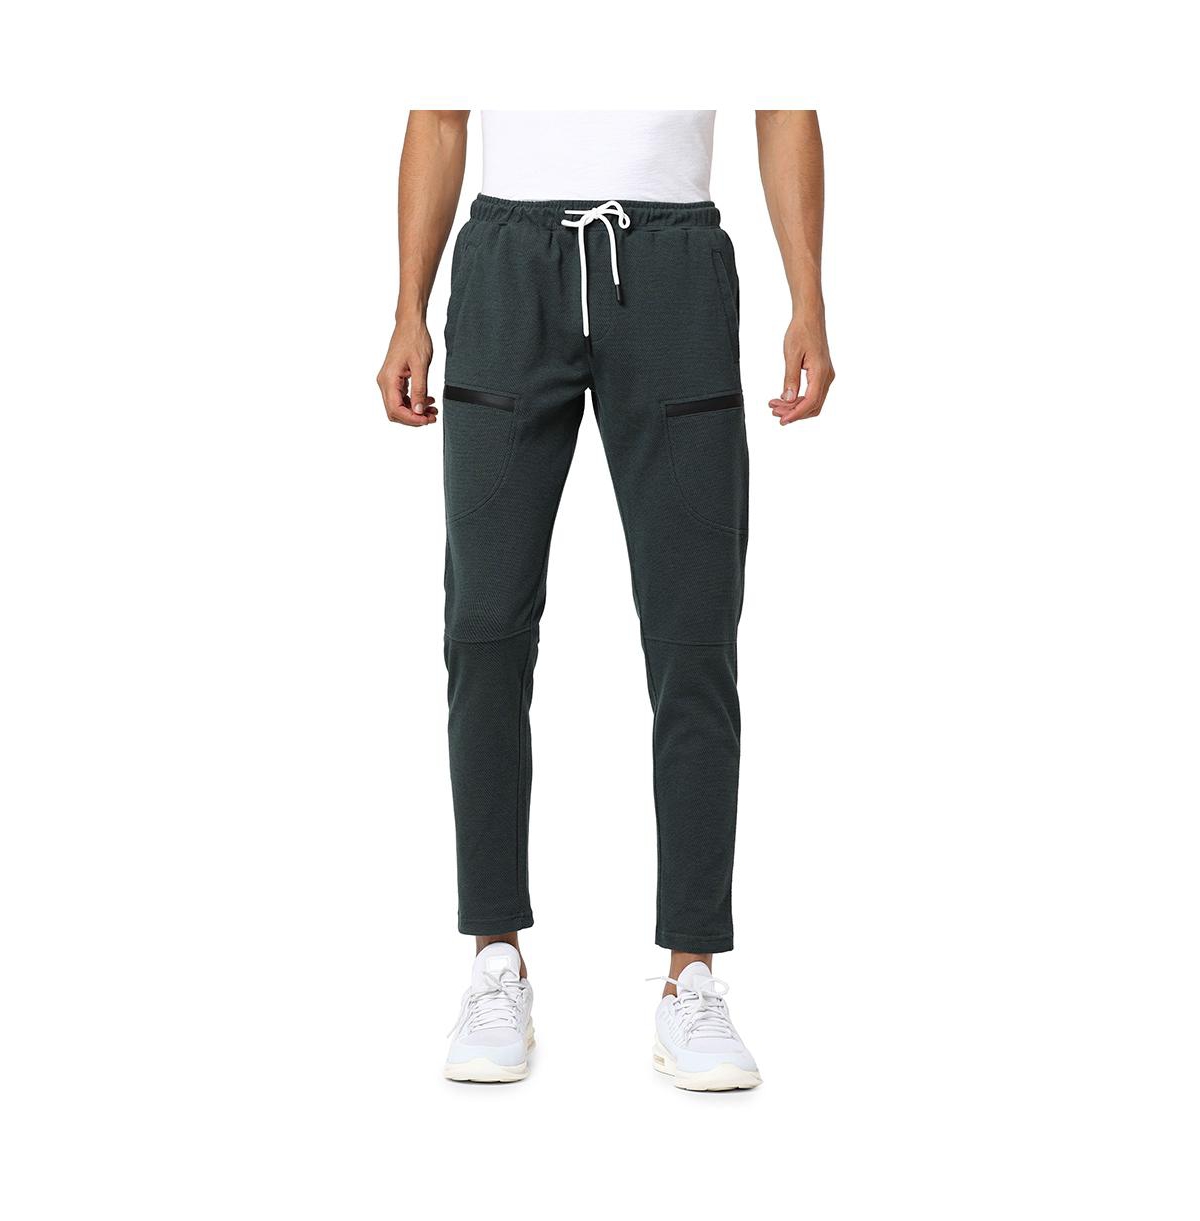 Campus Sutra Men's Forest Green Basic Casual Joggers